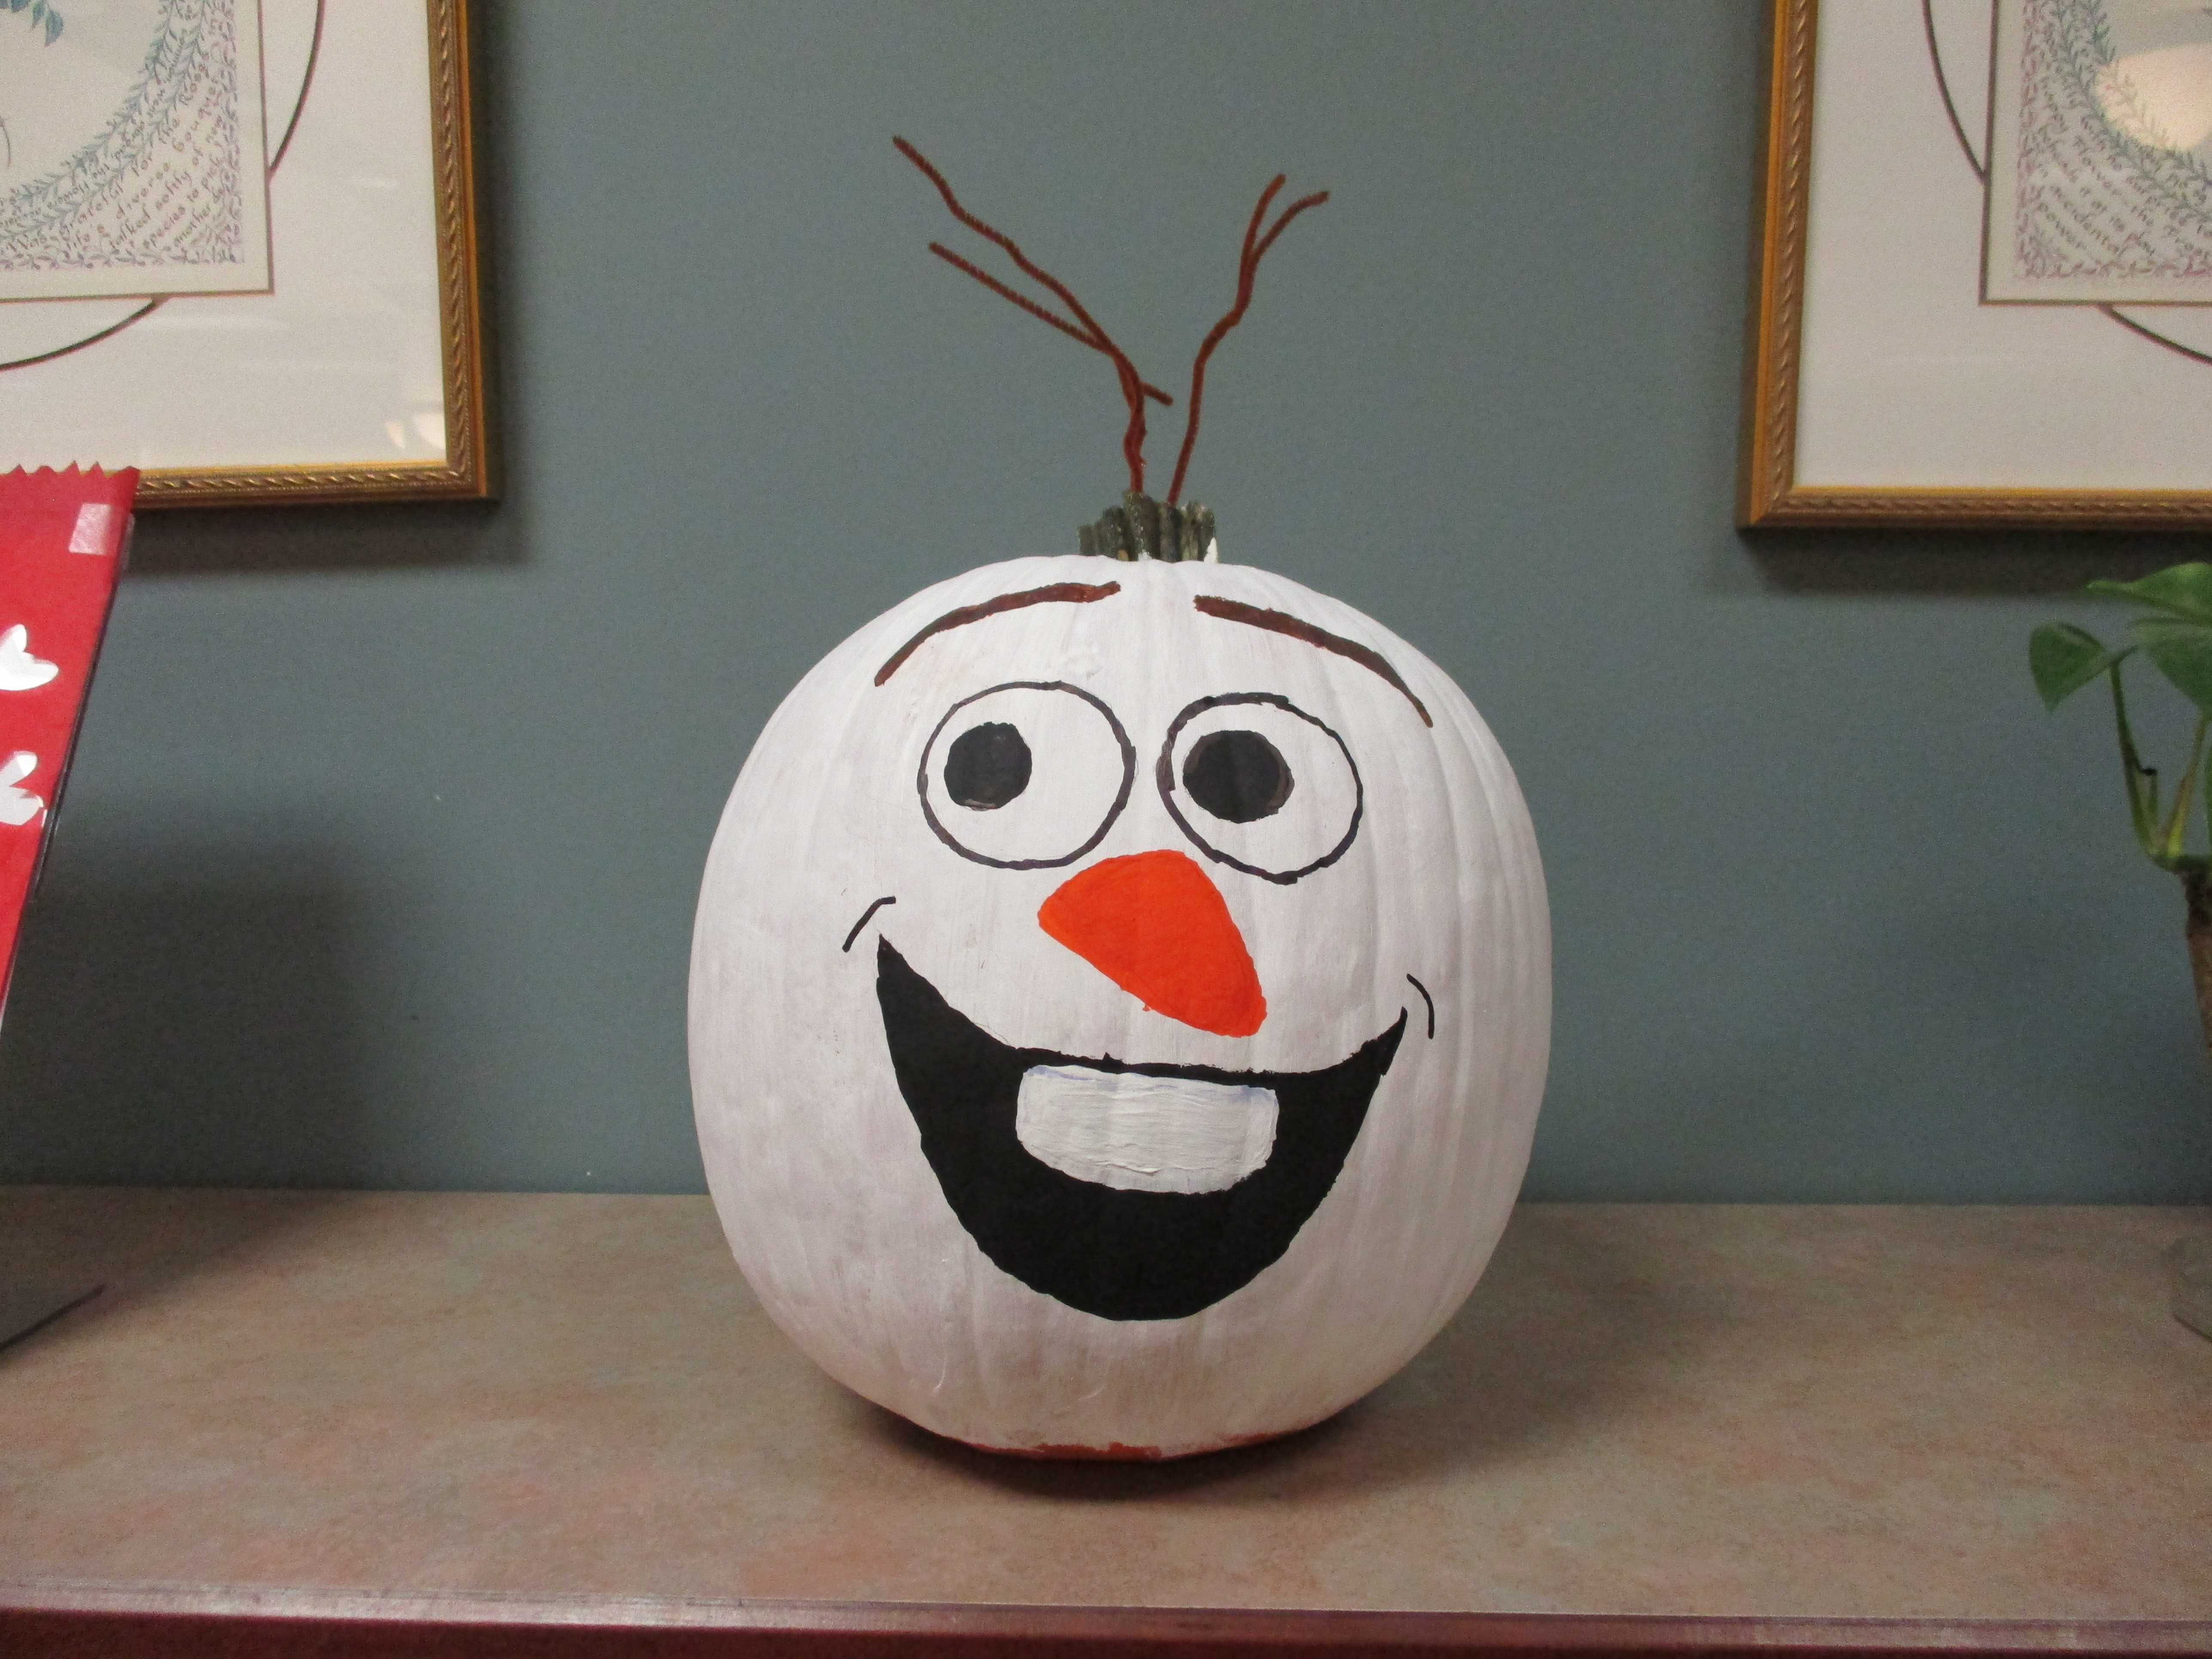 Pumpkin painted to look like Olaf from Frozen.